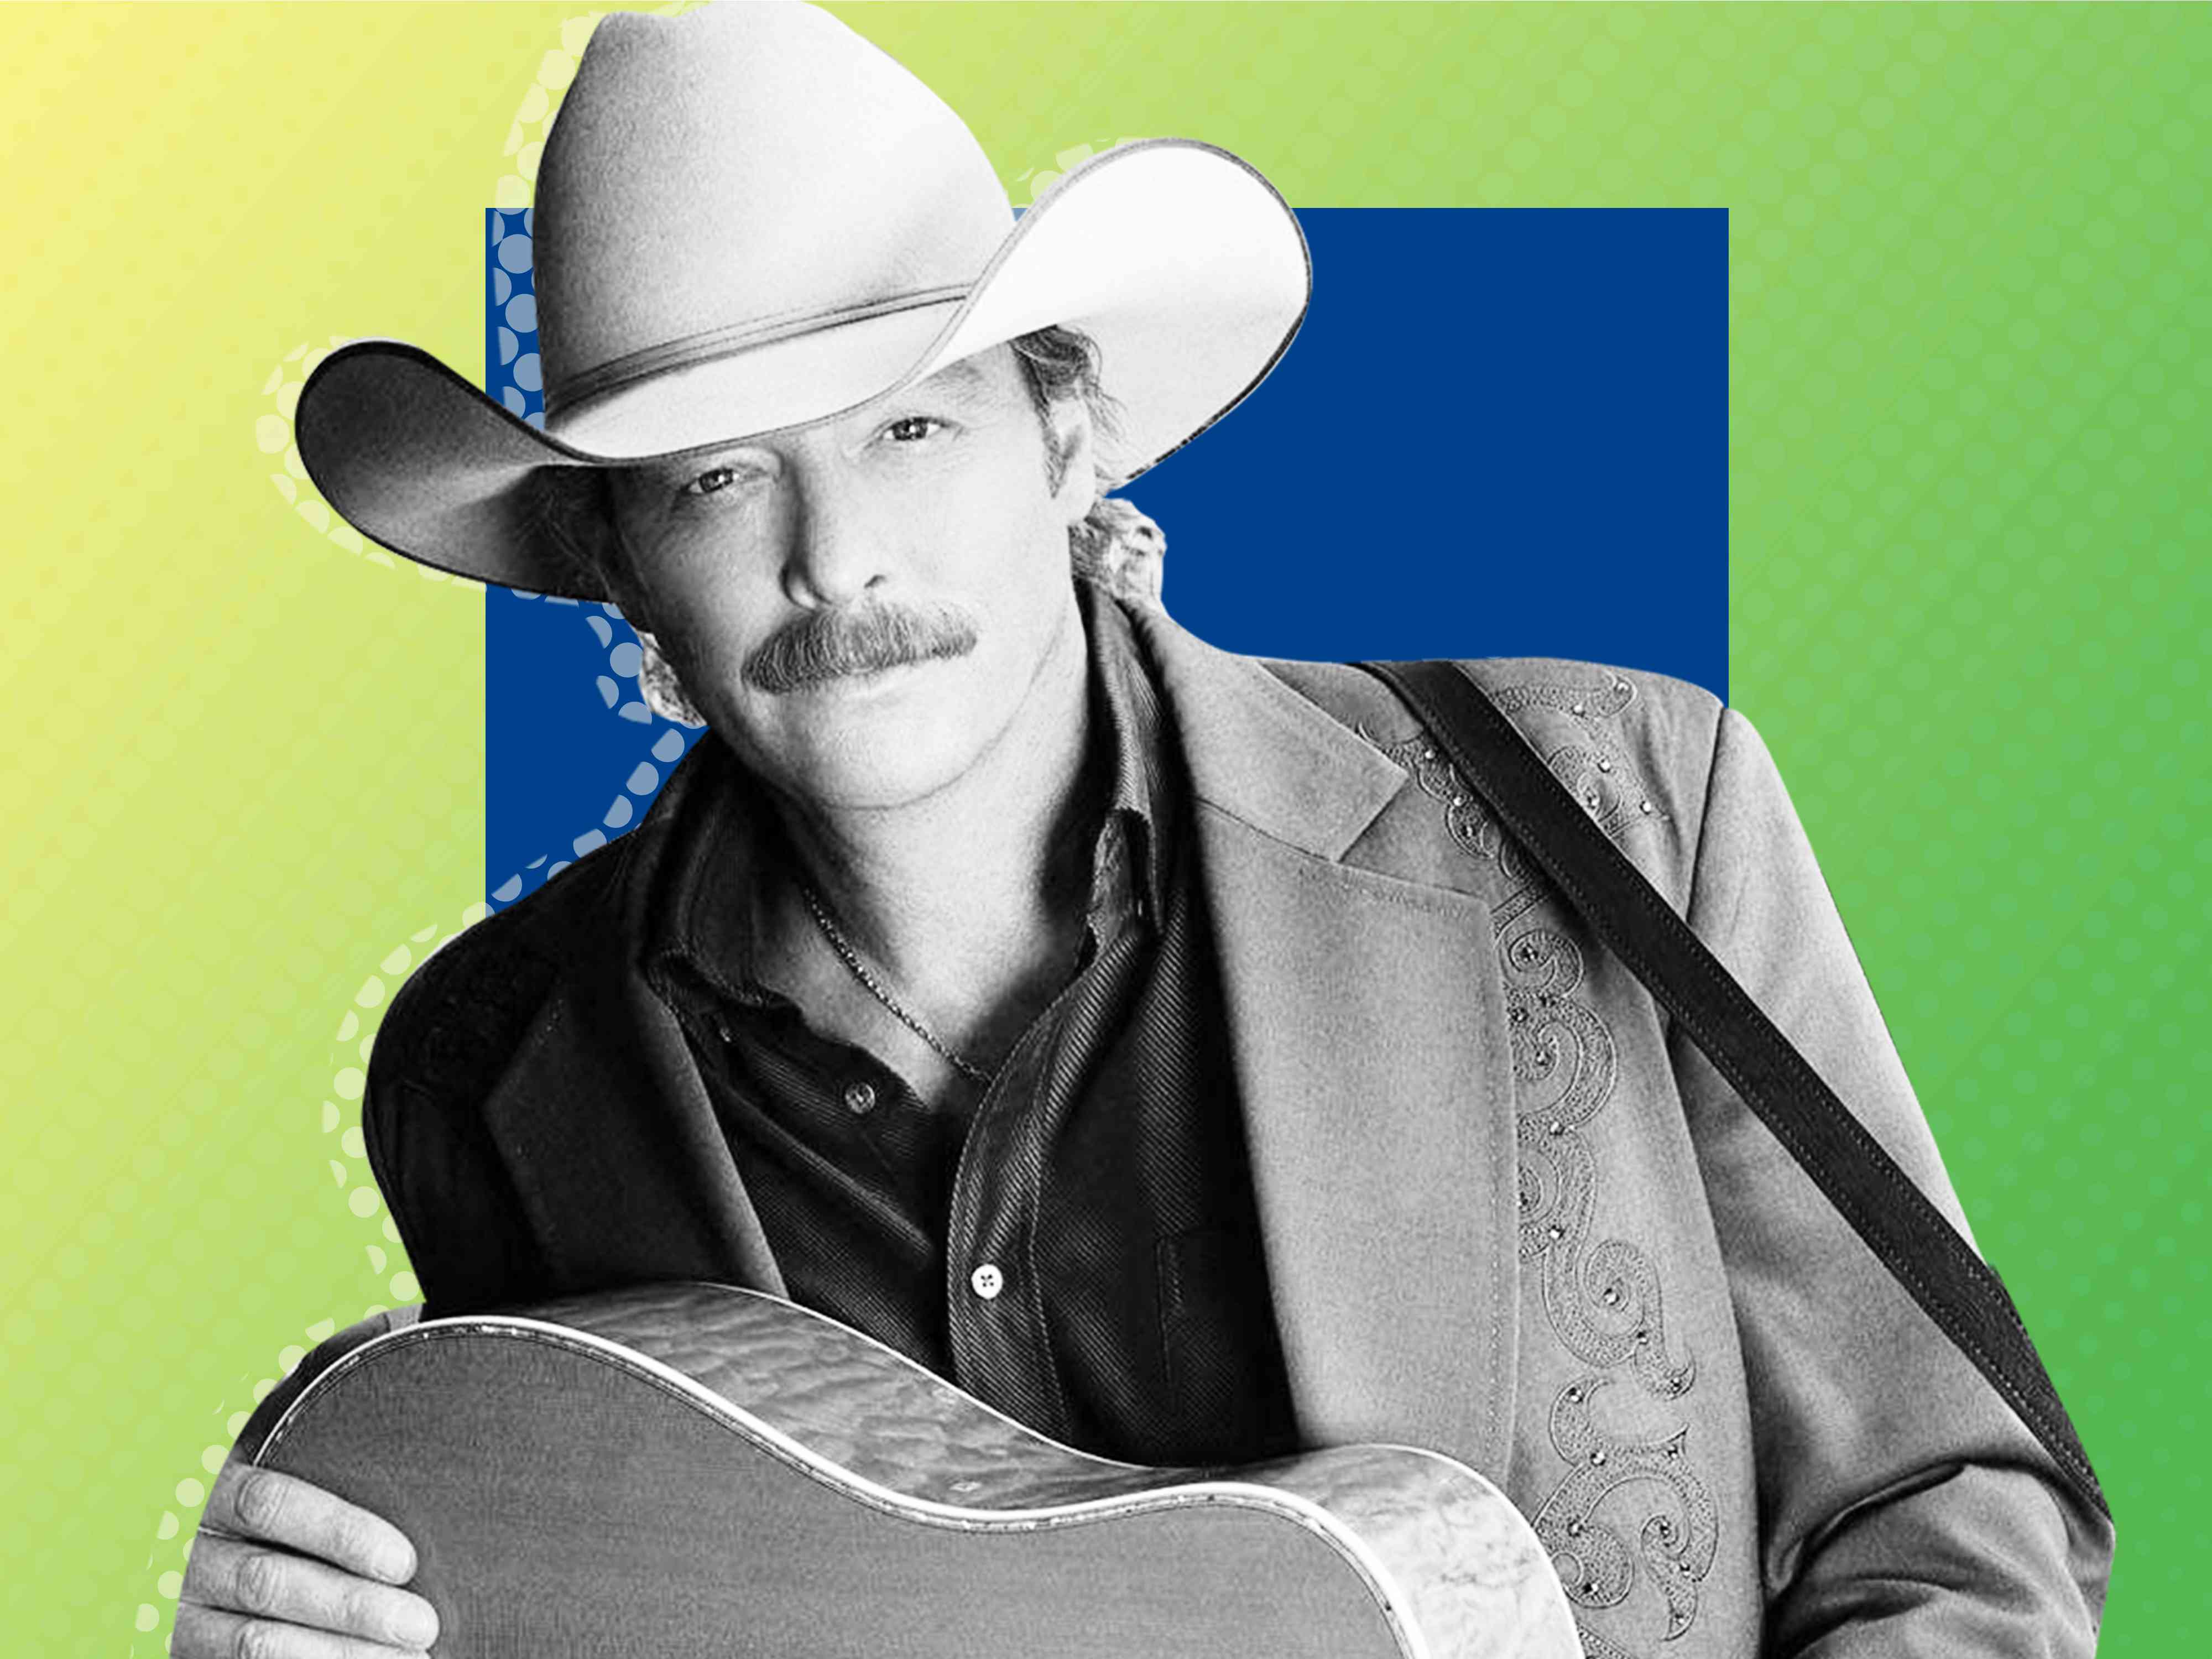 Alan Jackson’s Favorite 3-Ingredient Sandwich Is One You’ll Have to See to Believe